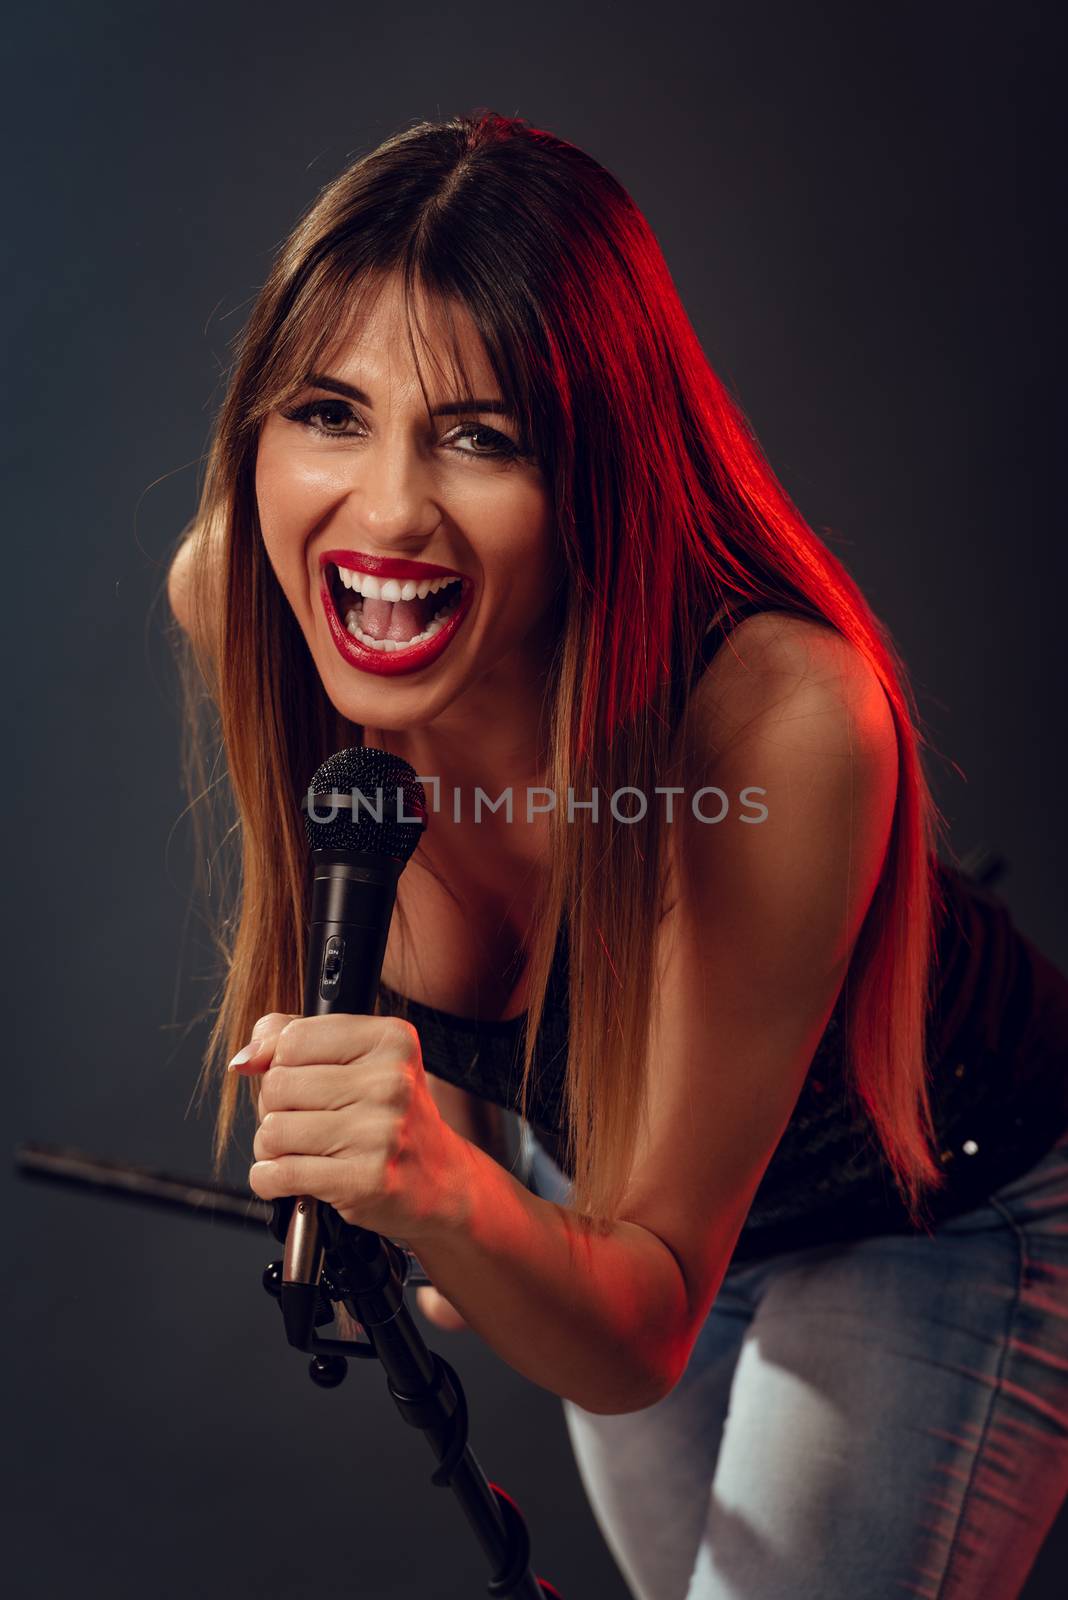 A young woman rock singer holding a microphone with stand and sing with a wide open mouth. Looking at camera.